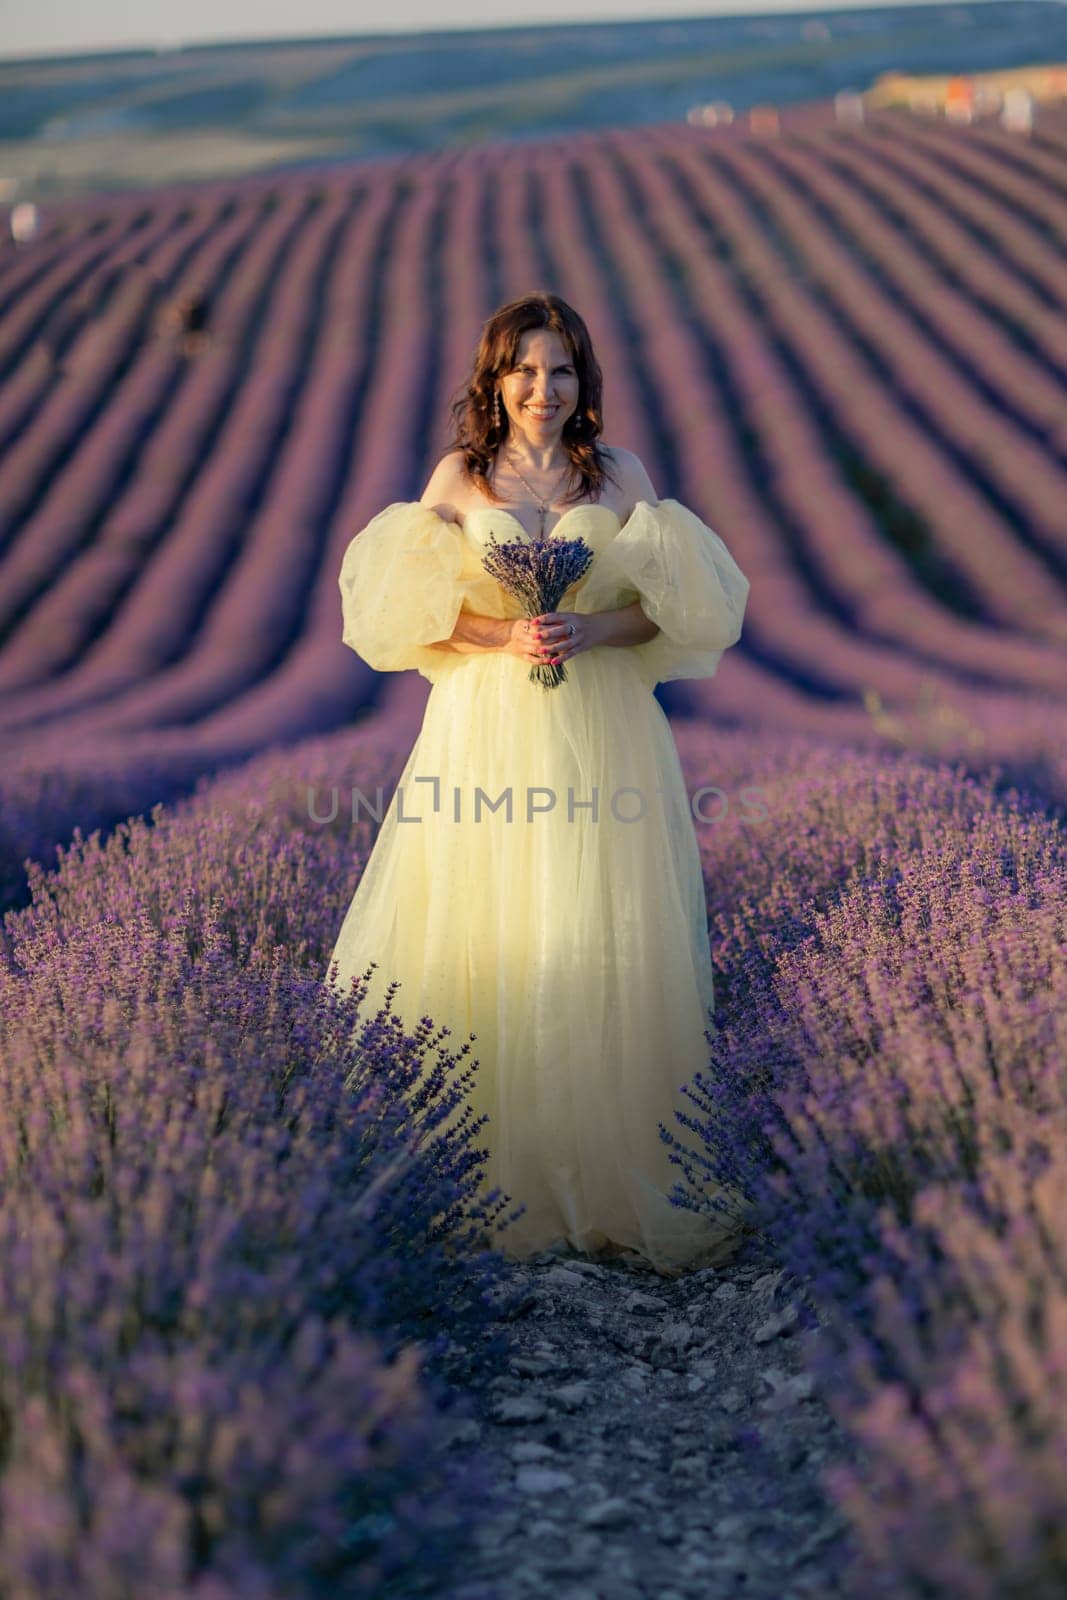 Woman lavender field. happy woman in yellow dress in lavender field summer time at sunset. Aromatherapy concept, lavender oil, photo session in lavender.